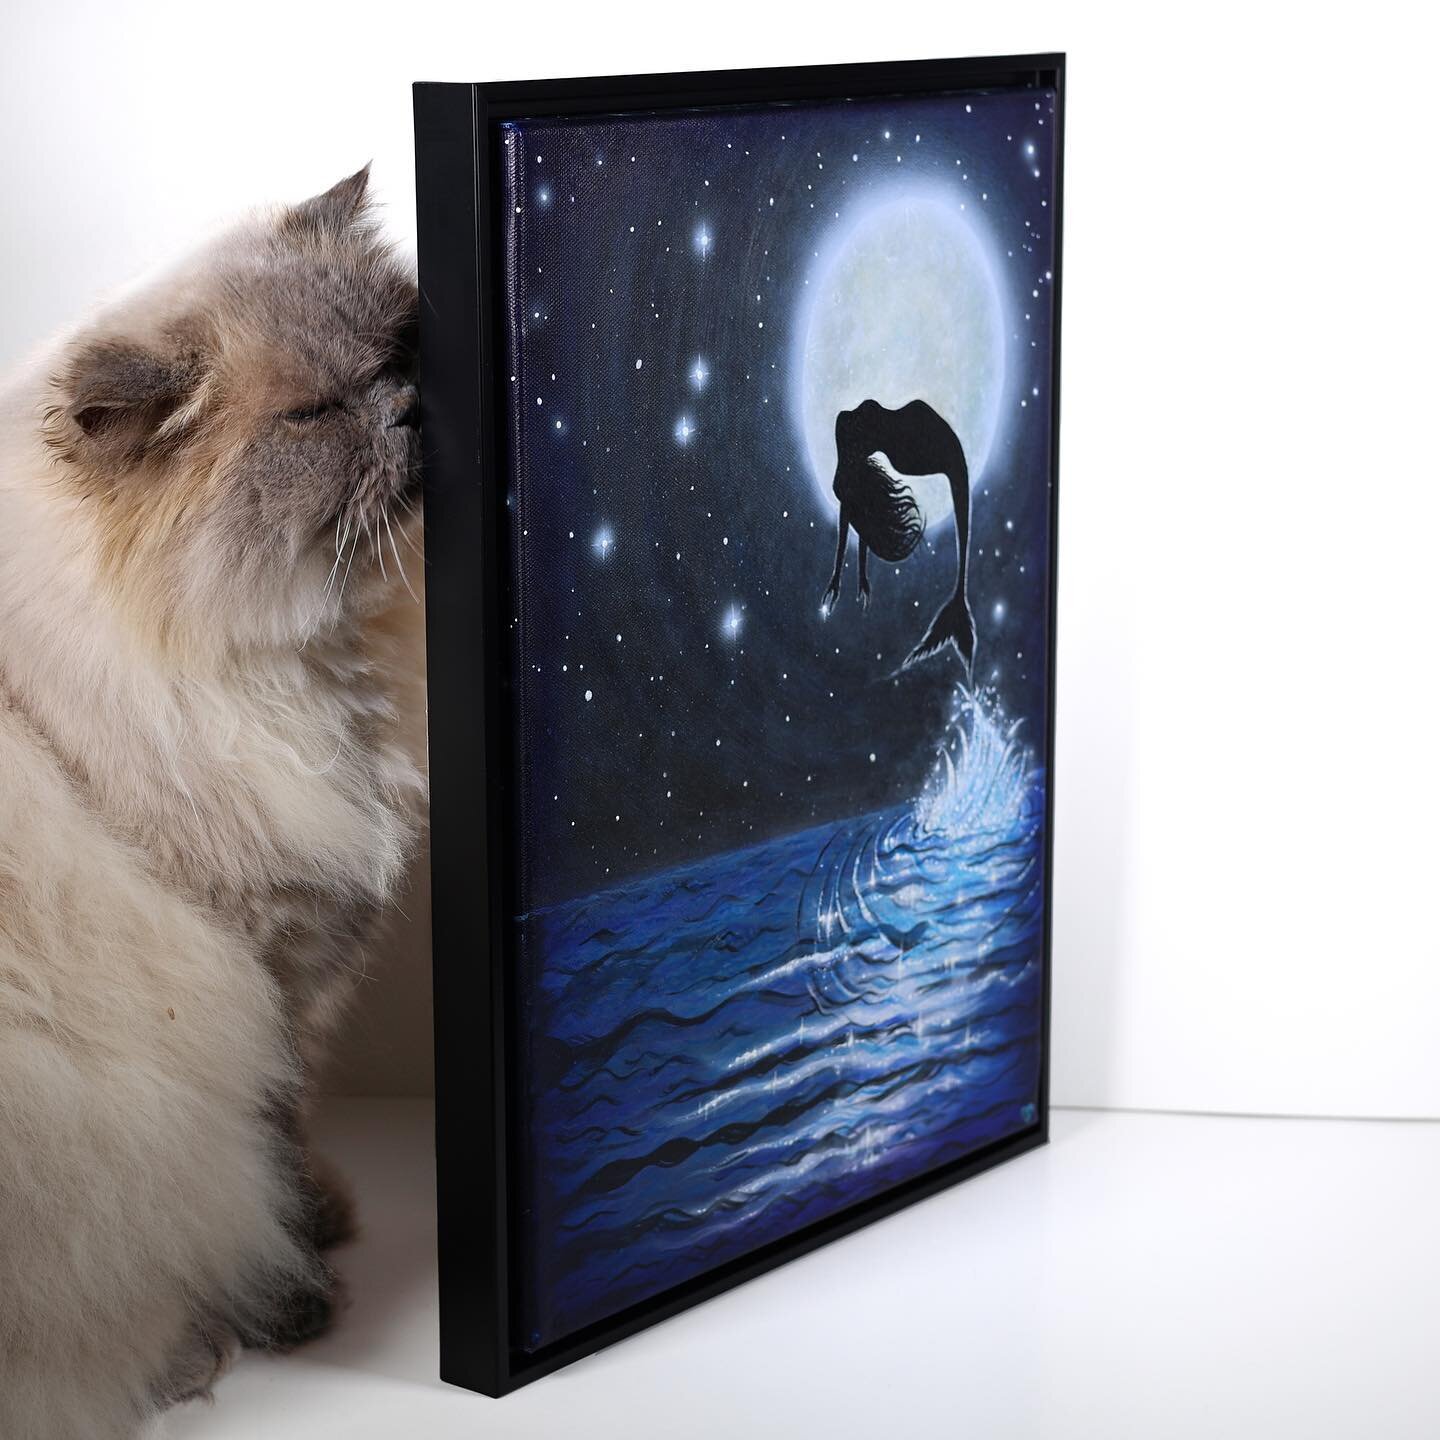 Stage Diver thinks he has to sniff everything I make 😹👃🖼✨ 

👉 Swipe to see it GLOW 👉

&ldquo;To the Moon and back&rdquo; original canvas painting by @makeartshine #makeartshine #artbyrondaalflen #mermaid #mermaidjumping #tothemoonandback #moonch